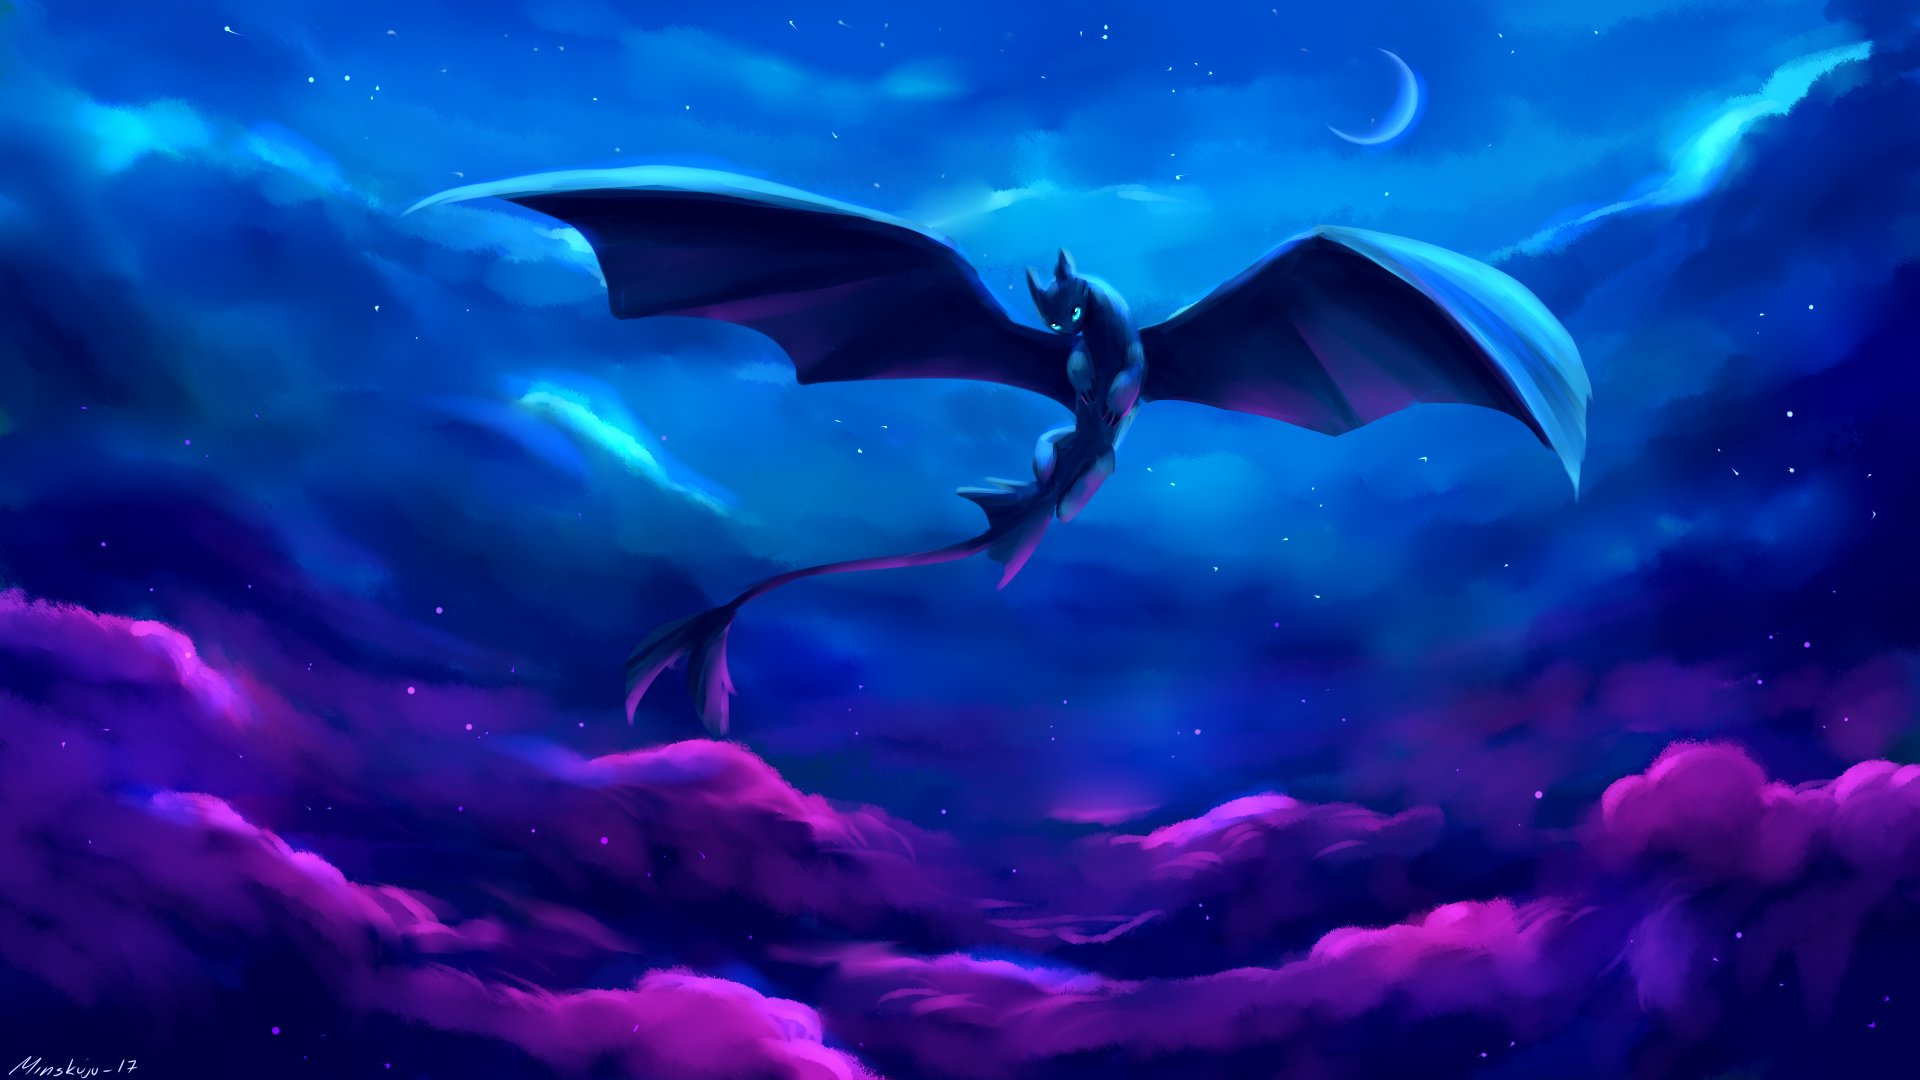 Night Fury, Toothless (How to Train Your Dragon) HD Wallpaper